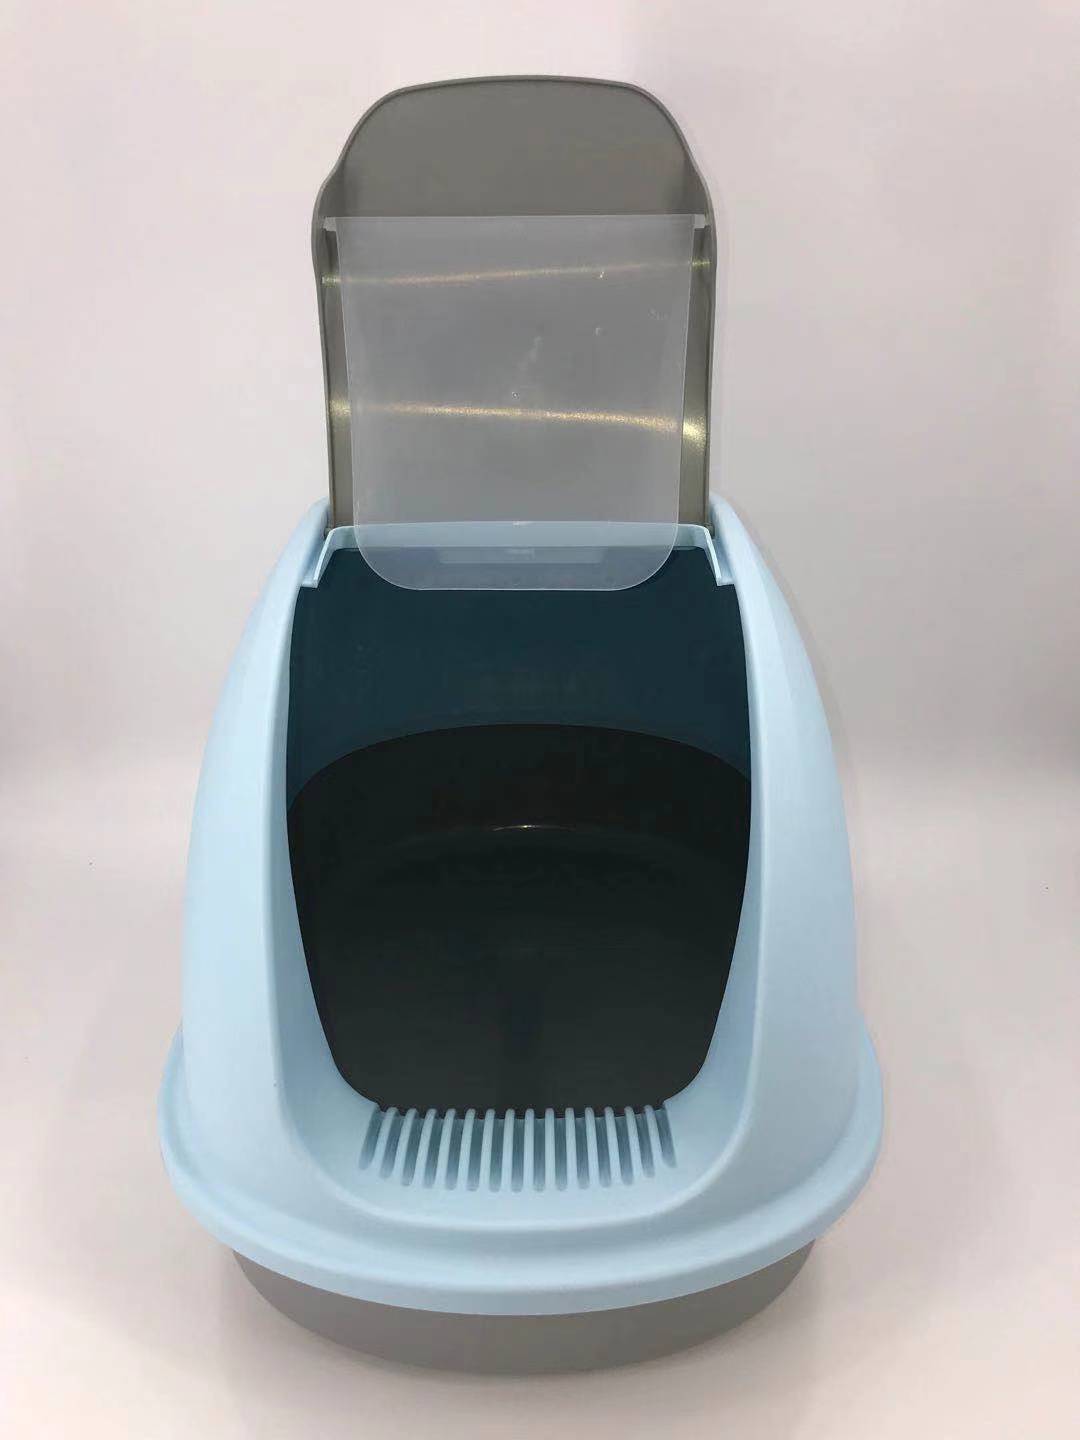 YES4PETS XL Portable Hooded Cat Toilet Litter Box Tray House w Charcoal Filter and Scoop Blue